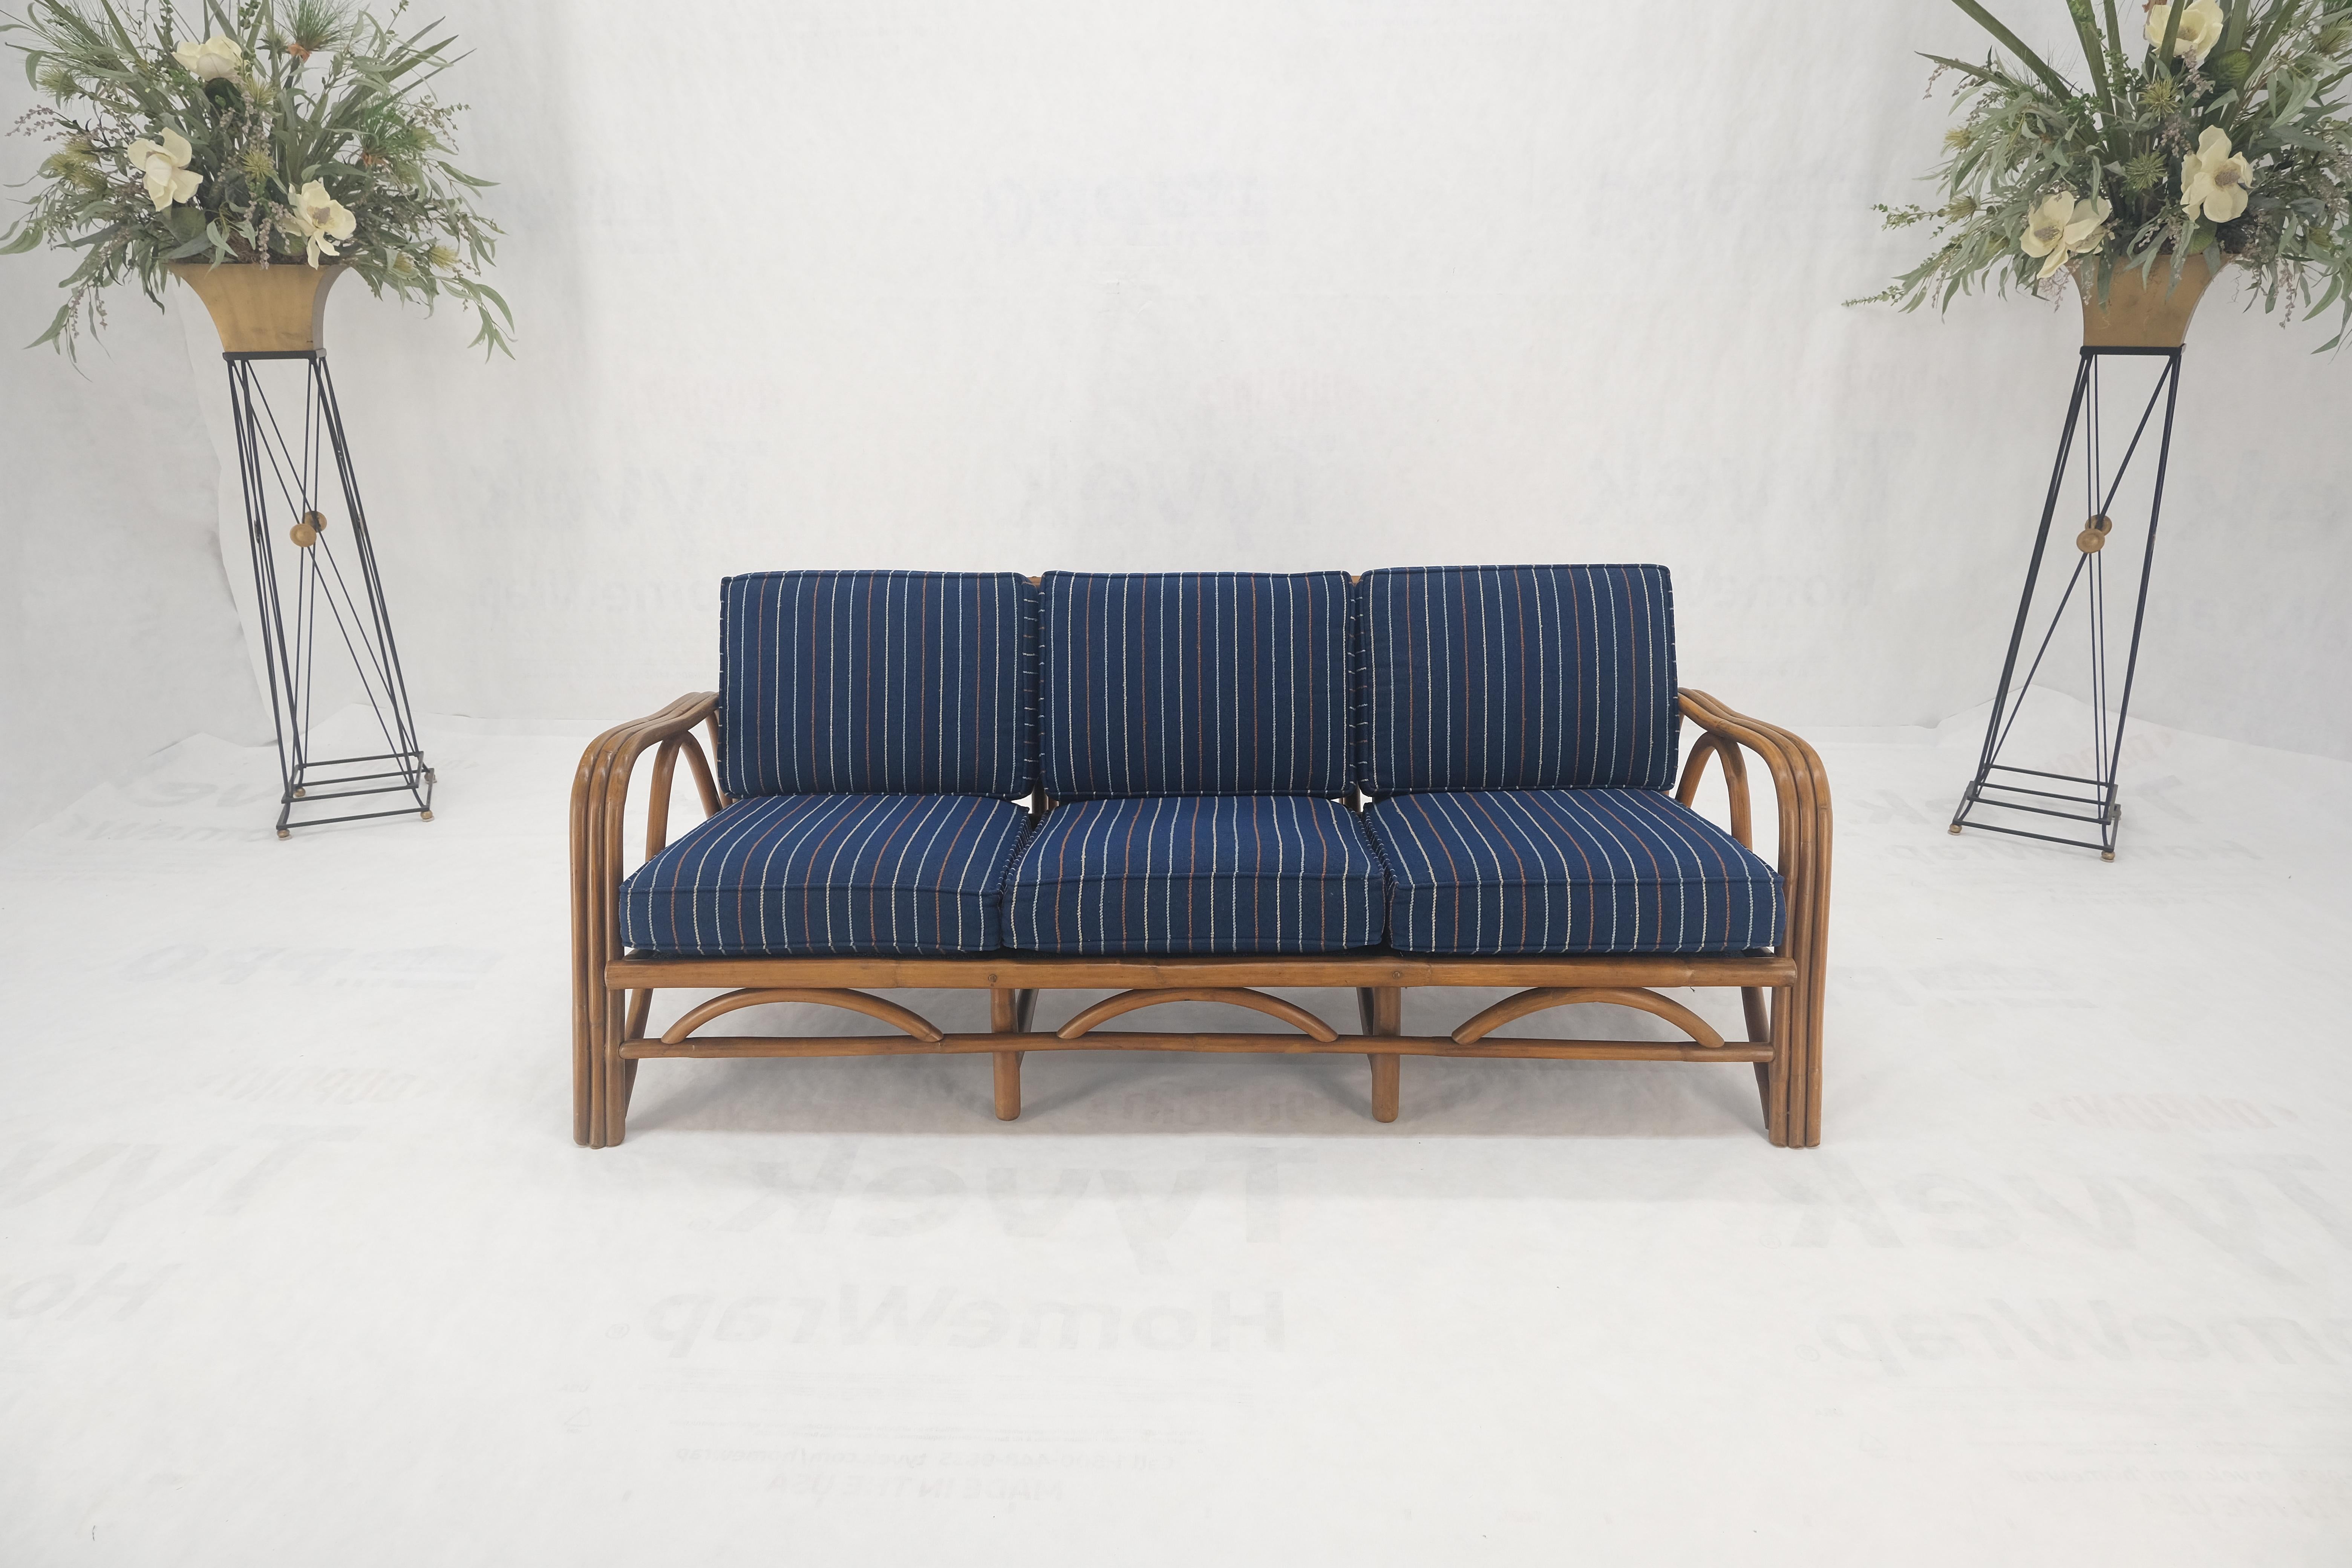 American !970s Striped Blue Upholstery Bamboo Frame Mid Century Modern Sofa MINT! For Sale